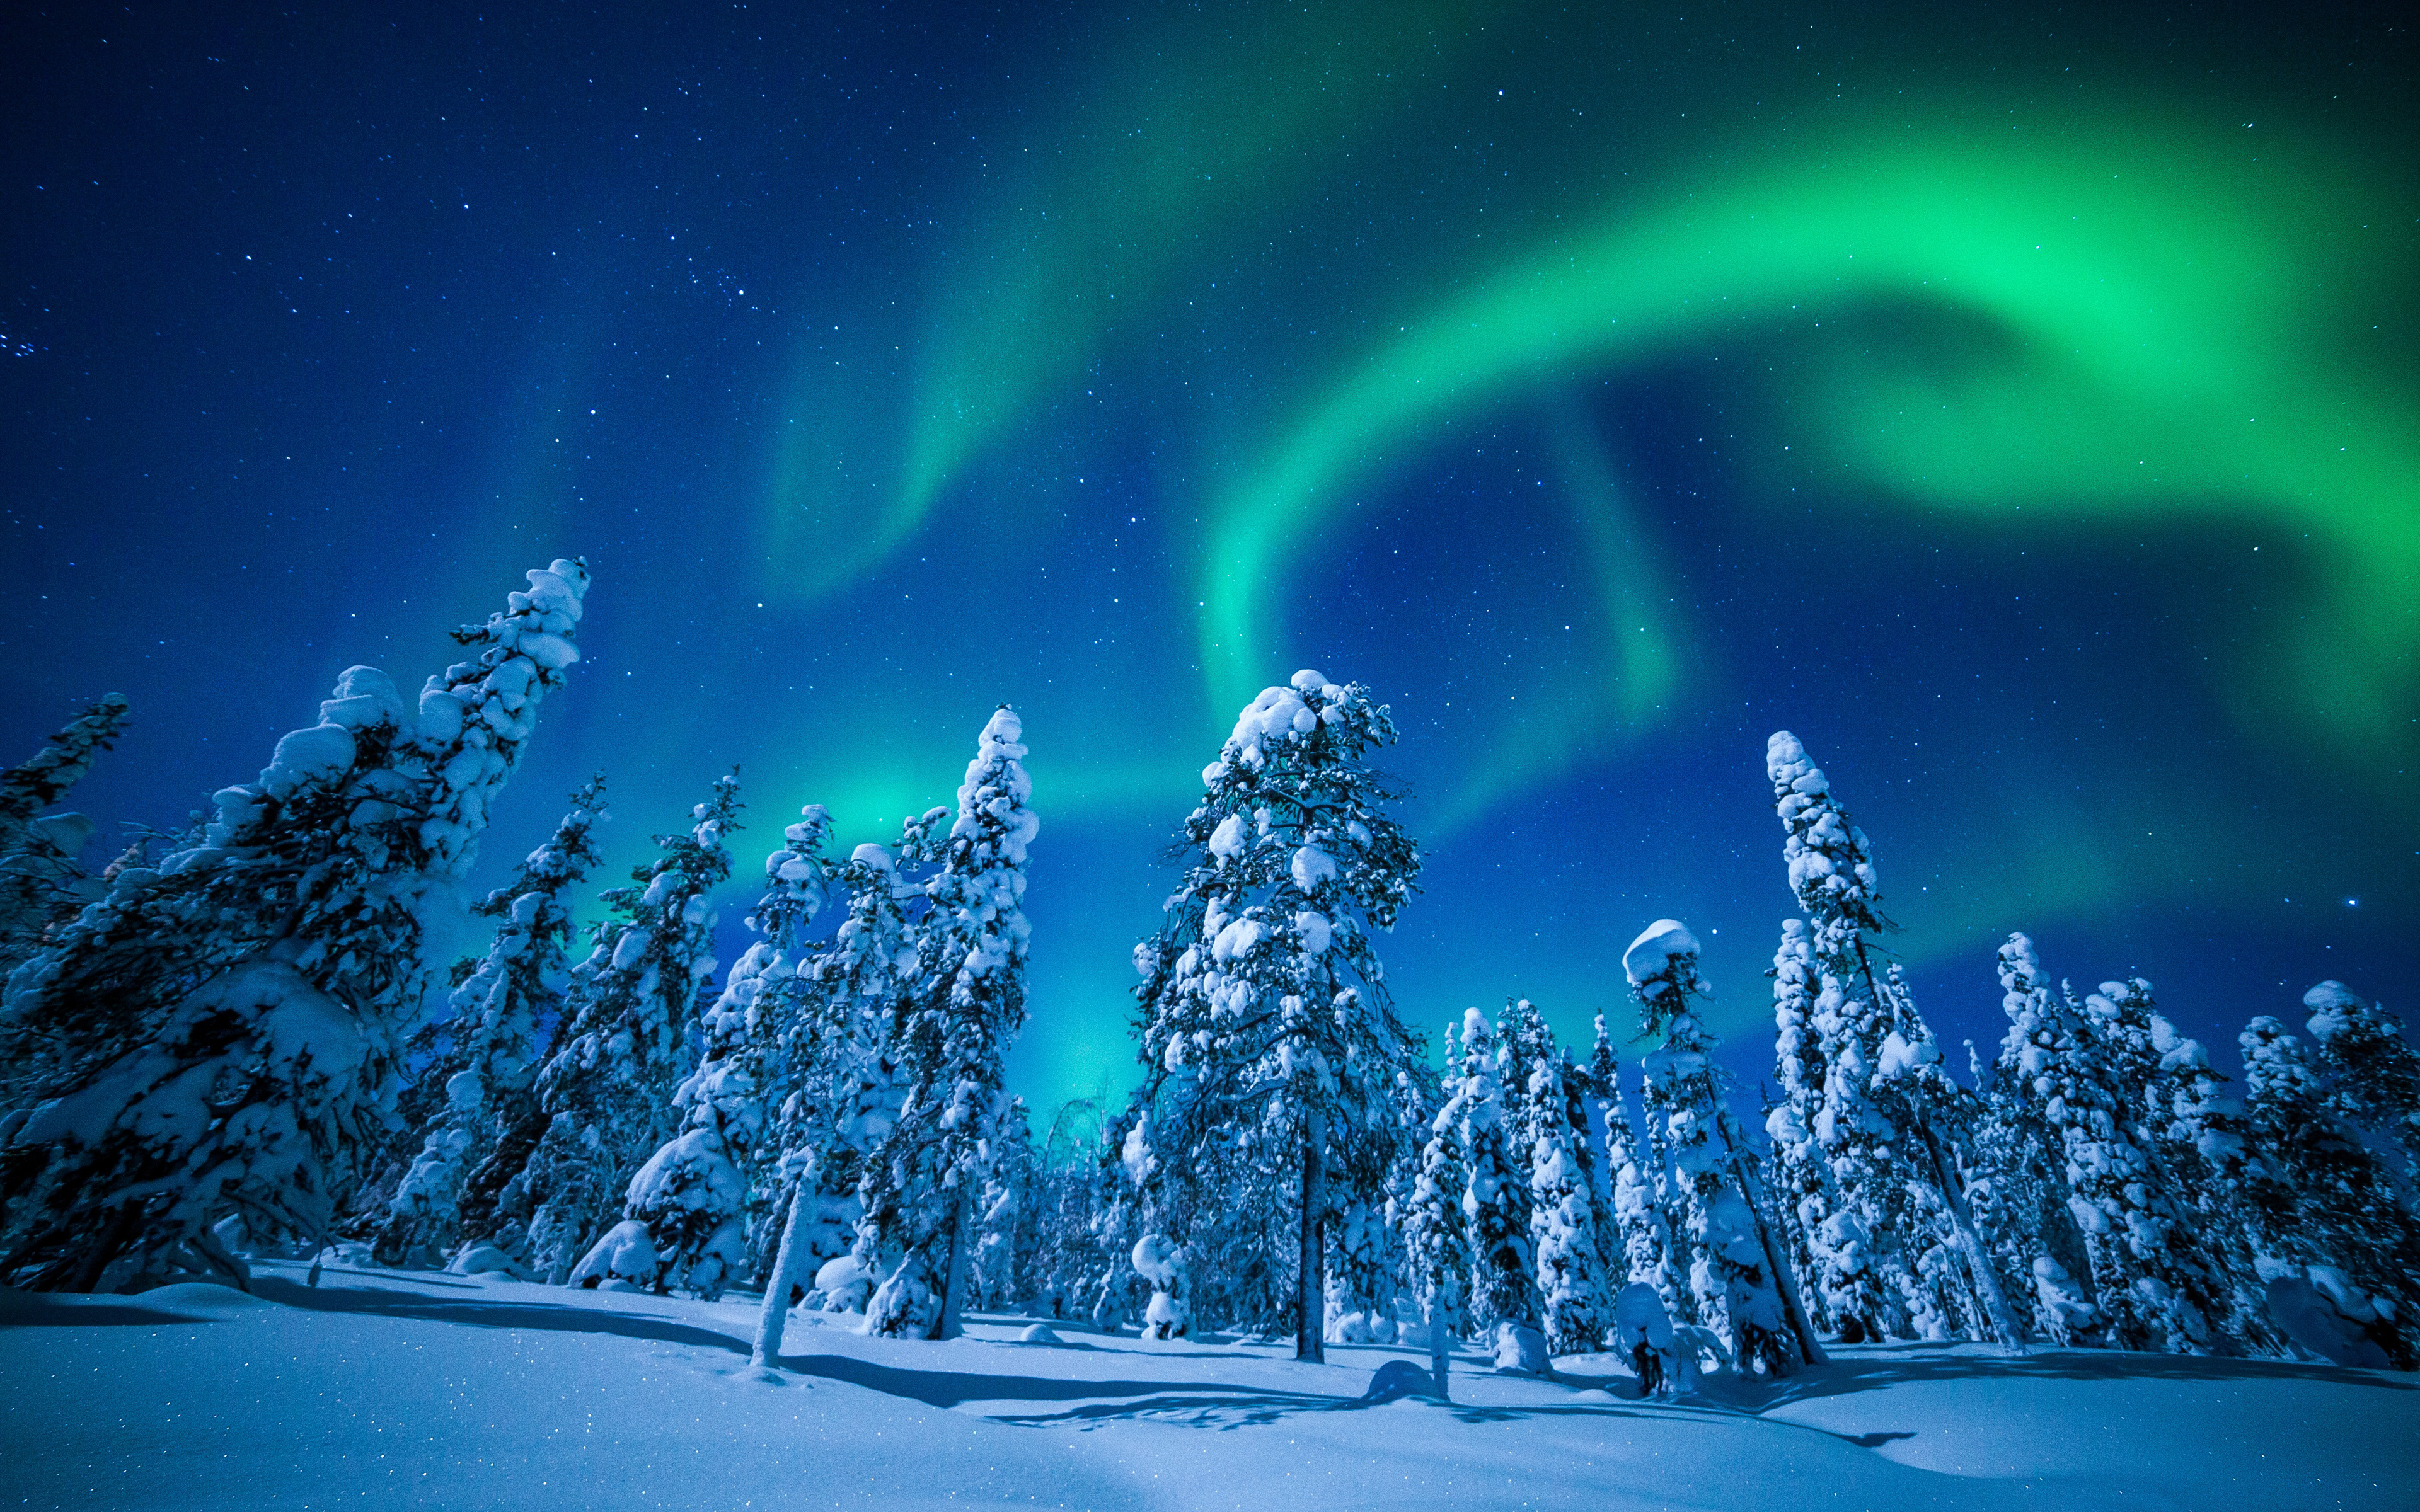 Download wallpaper Lapland, 4k, night, winter, forest, northern lights, Finland, Europe for desktop with resolution 3840x2400. High Quality HD picture wallpaper